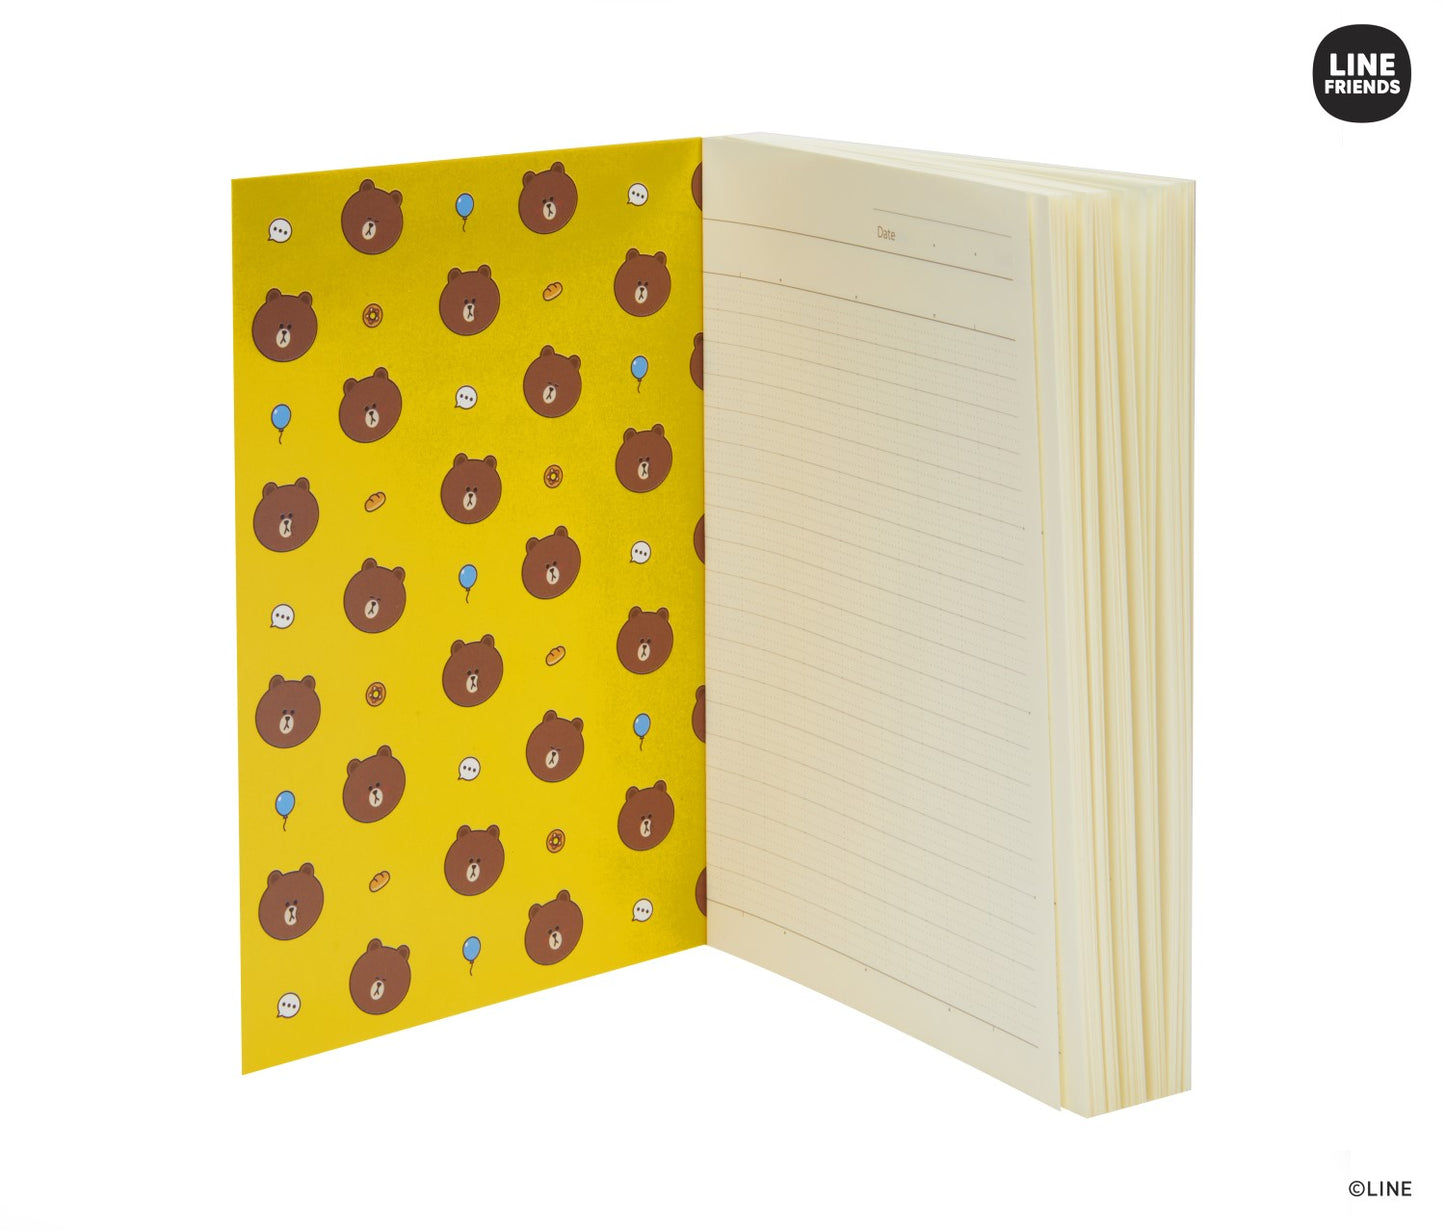 A6 "Brown" Oasis Line Friends Notebook